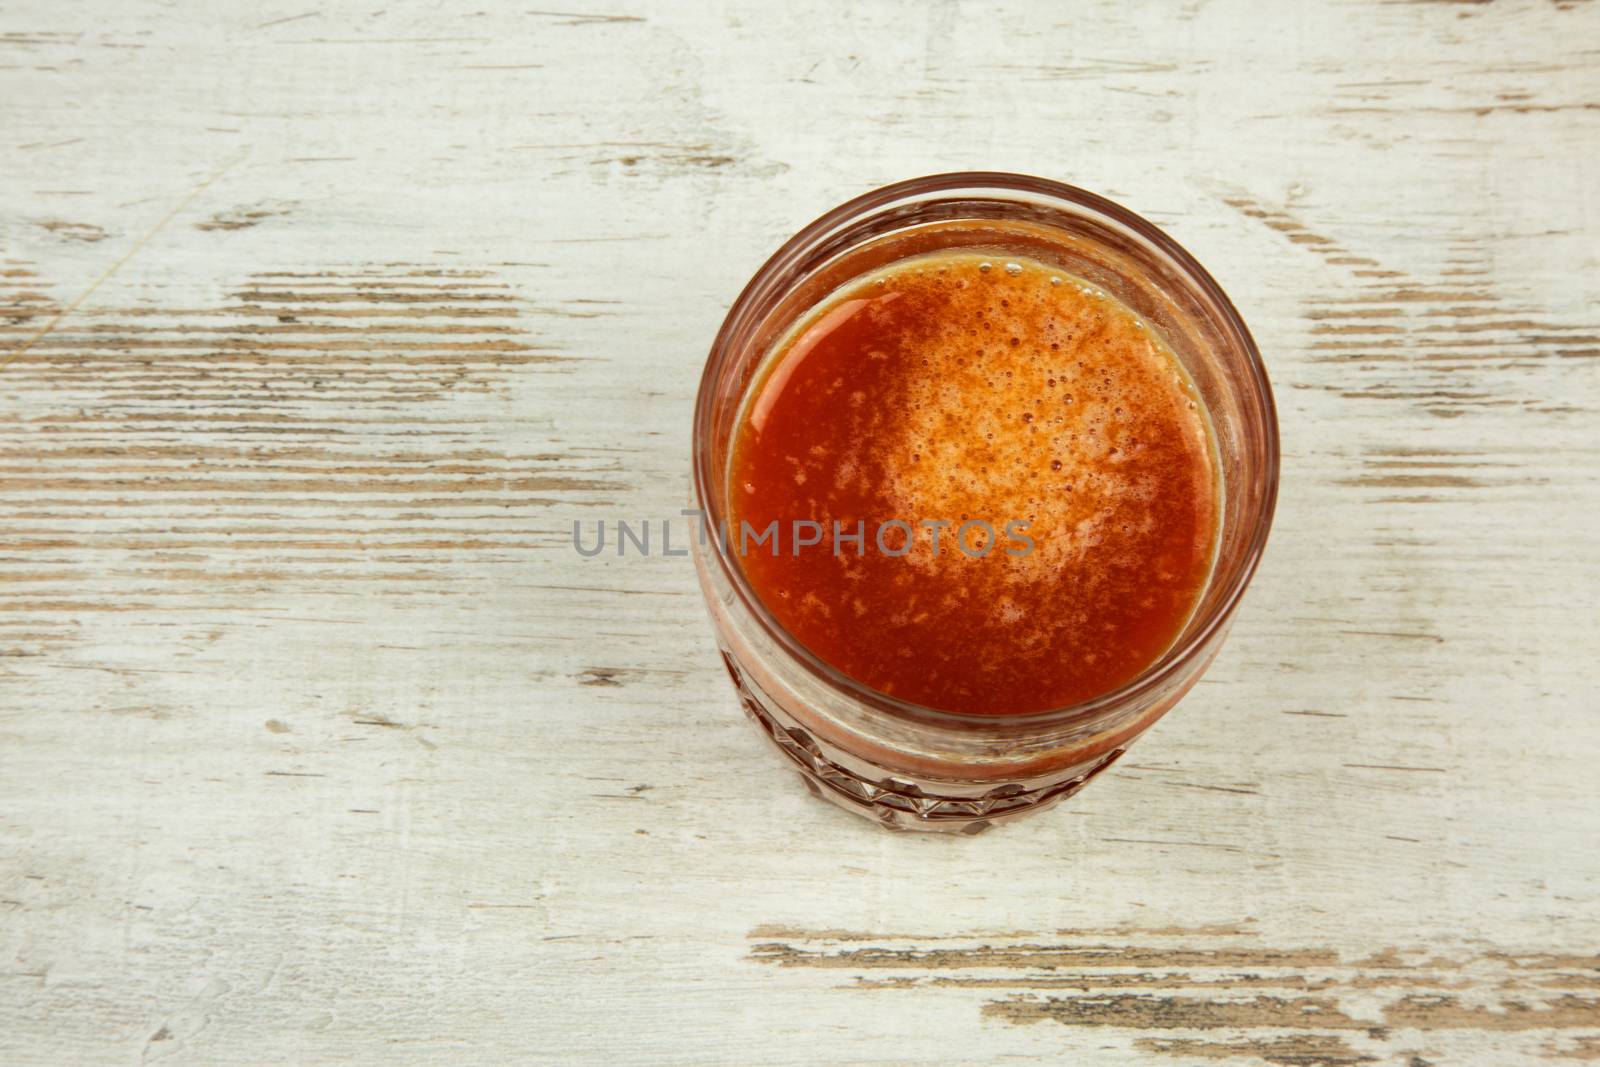 Gass of fresh tomato juice, on a wooden countertop in vintage style. Flat,horizontal view.